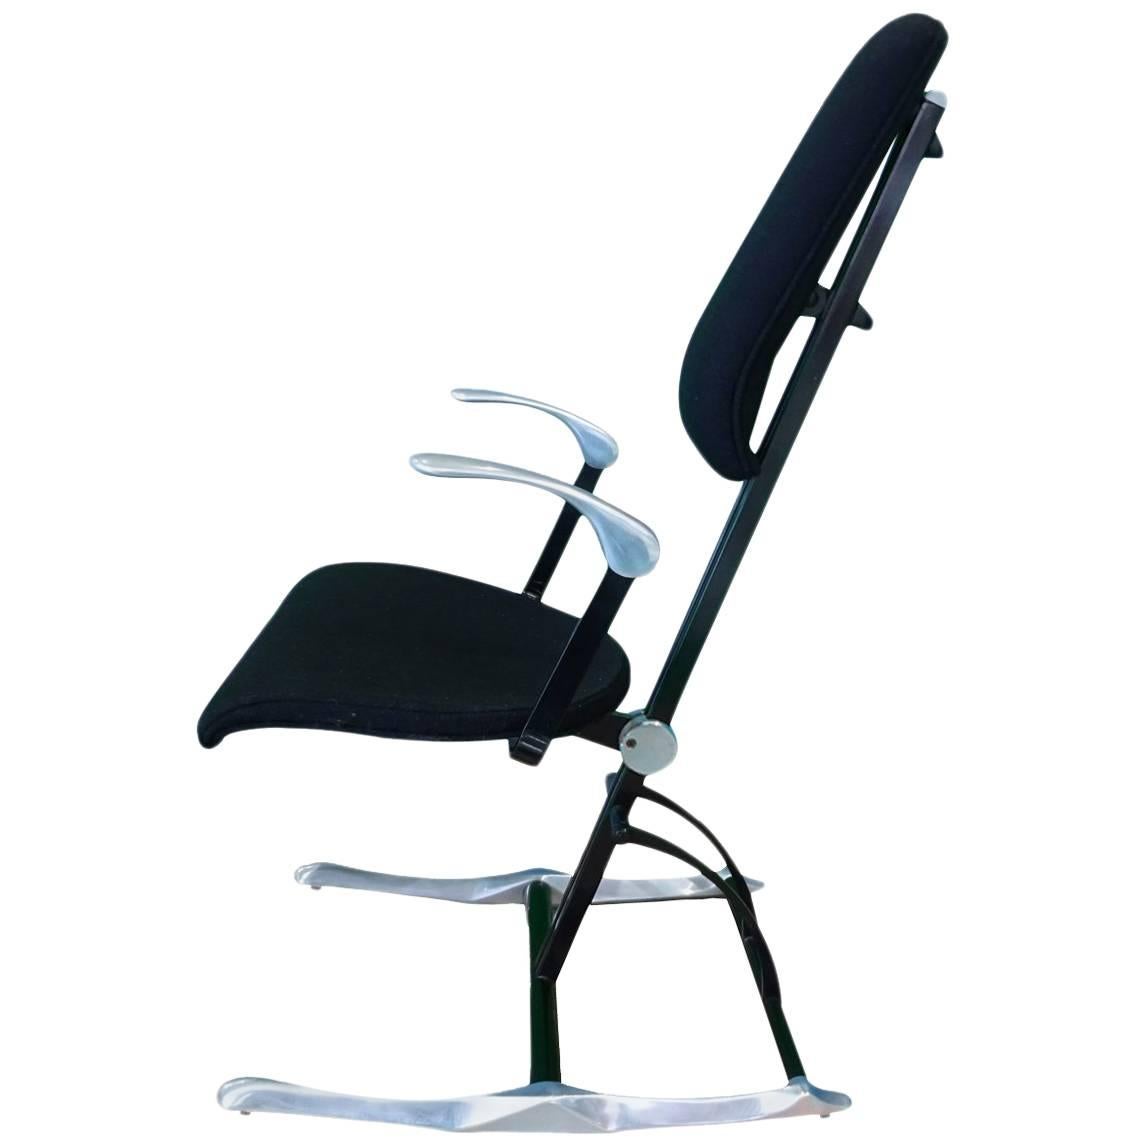 Rare and Pristine Hille Meridio Posturepedic Chair Designed by Michael Dye For Sale